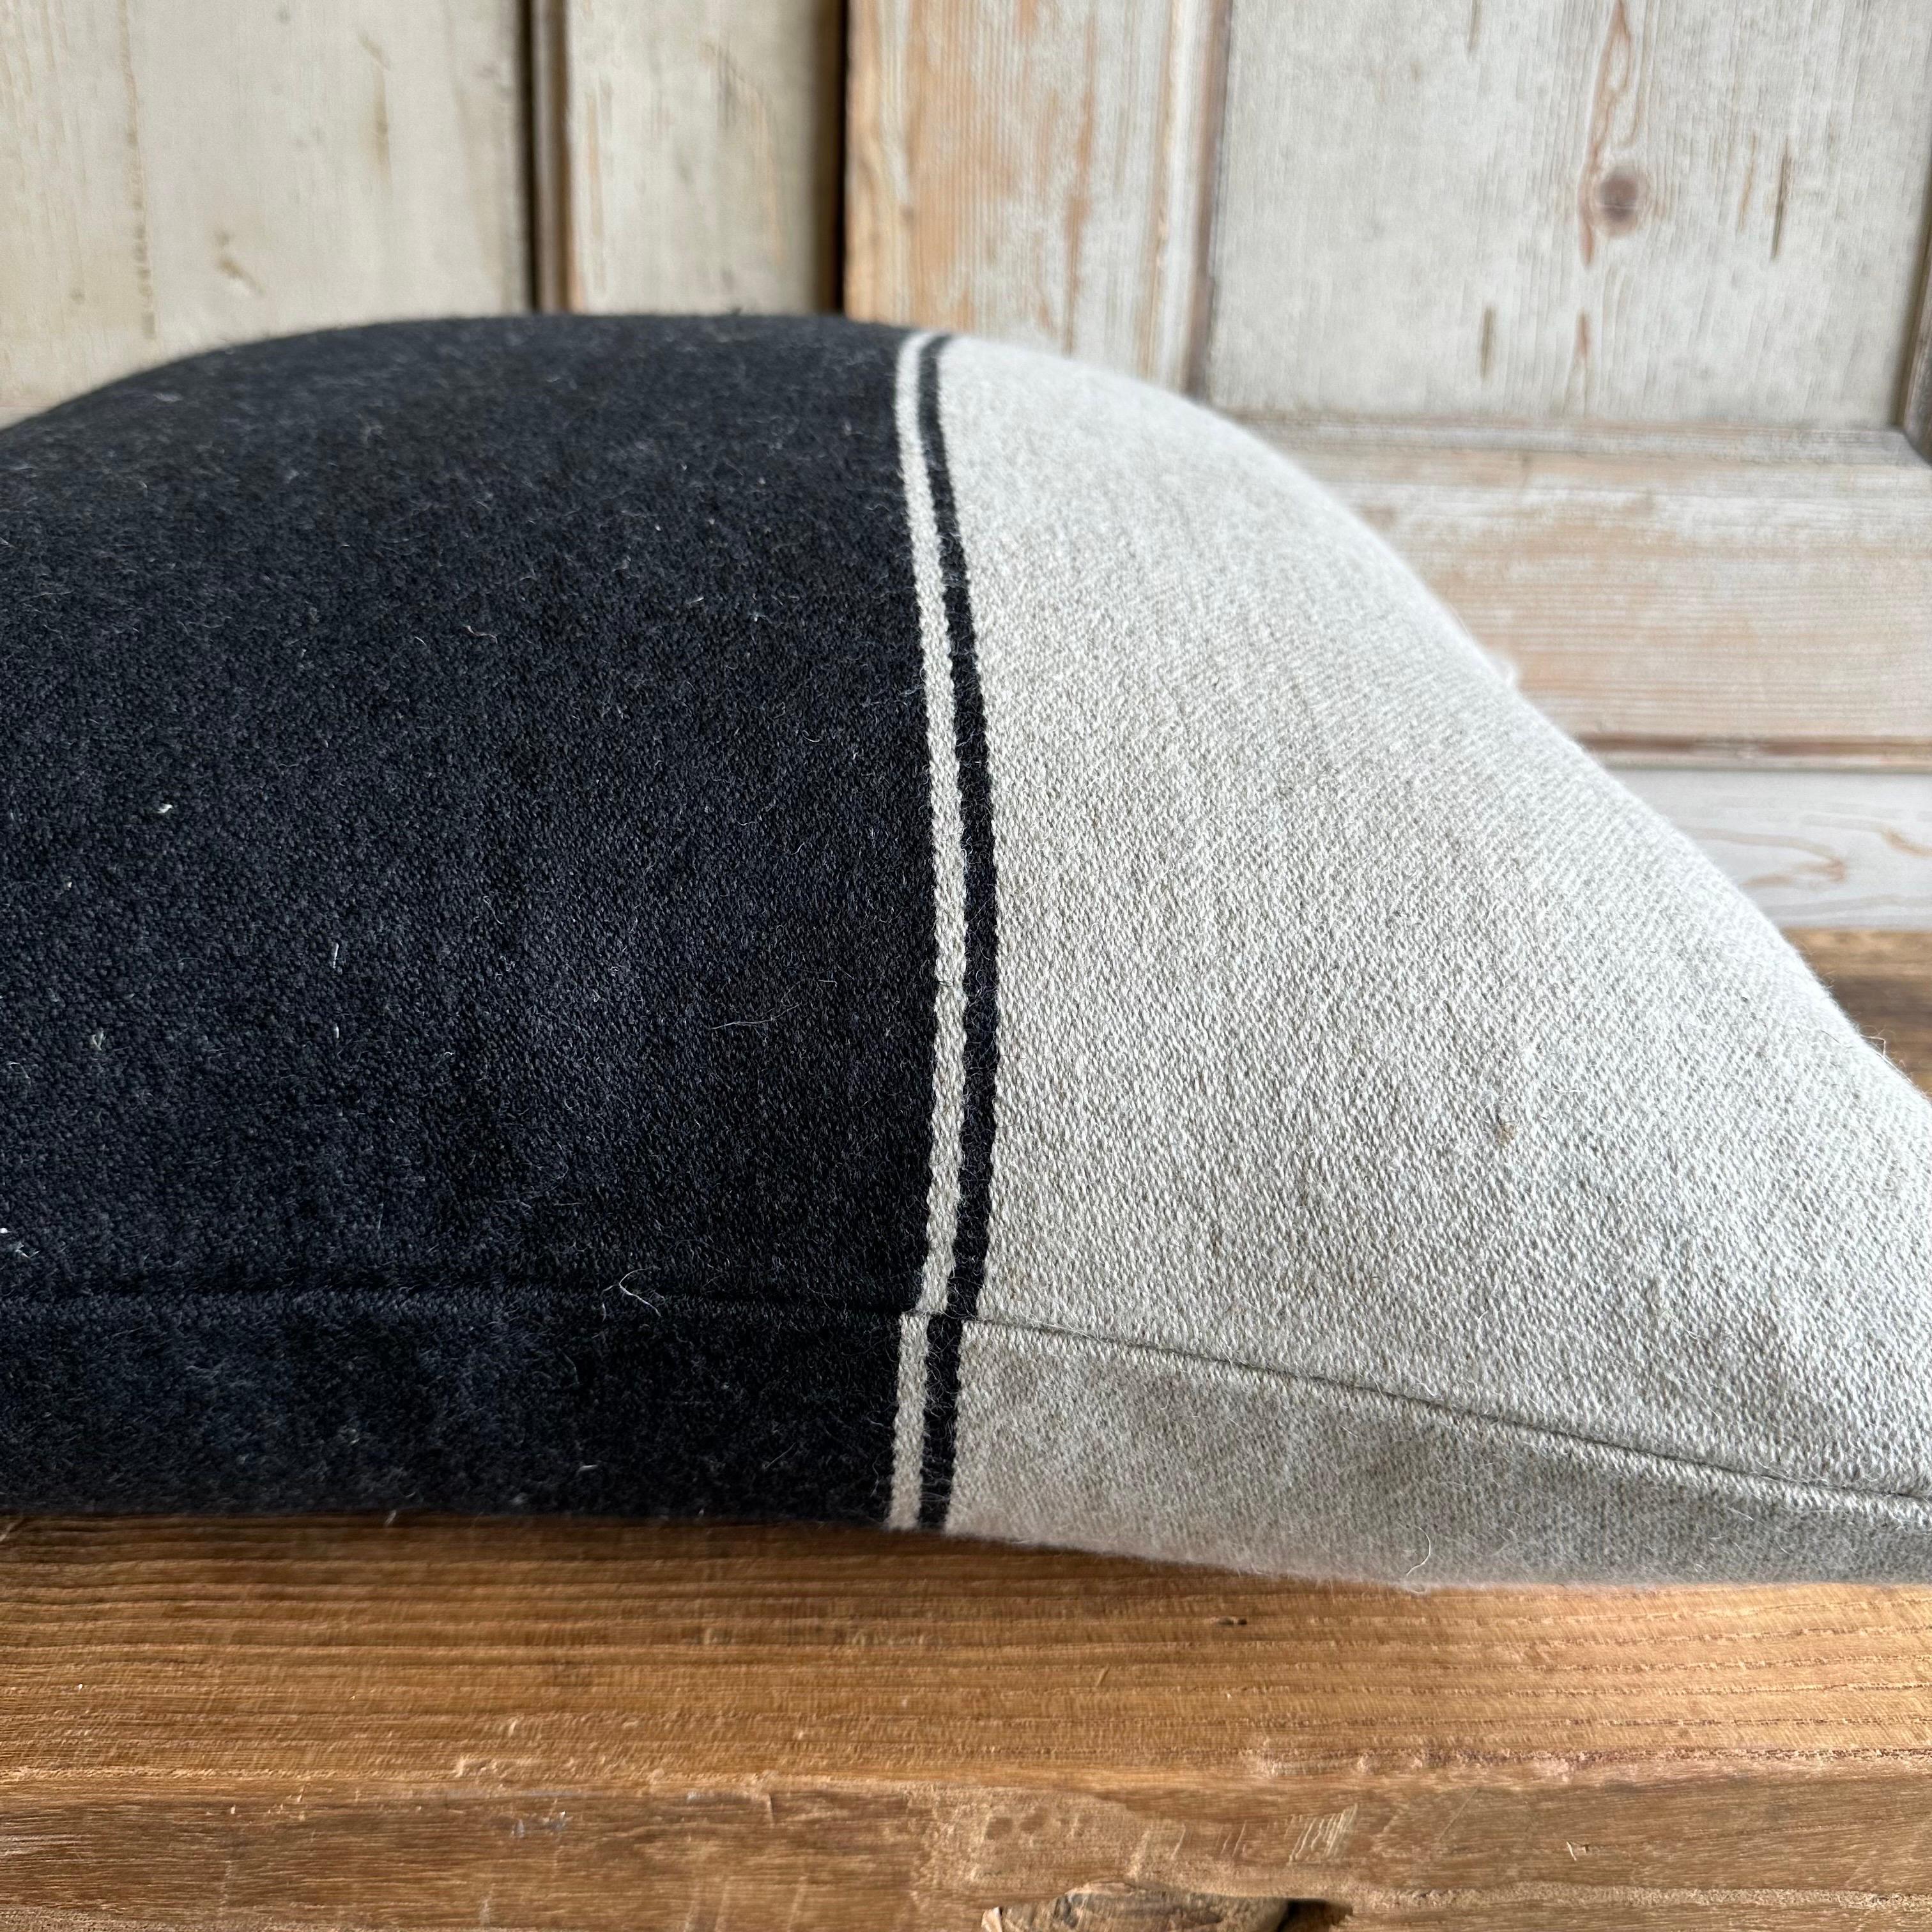 Beautiful Linen and wool pillow in black and natural with black stripe.
Double sided, same on both sides.
Zipper closure
Size 25x25
Insert is included.
Dry Clean recommended.